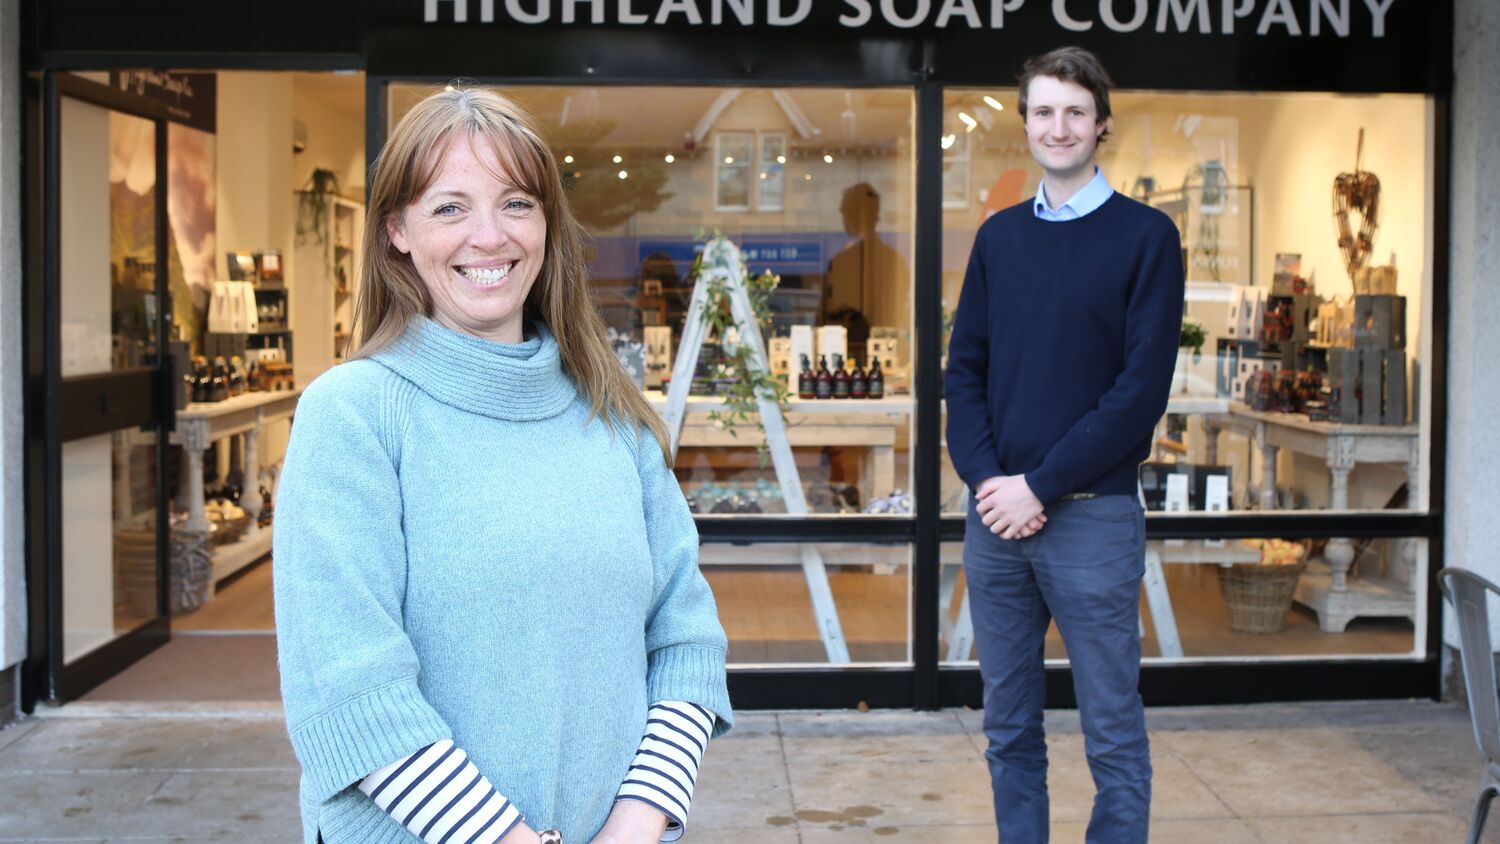 A woman and a man pose smilingly in front of a shop entrance and store window, that has the sign above it reading Highland Soap Company.